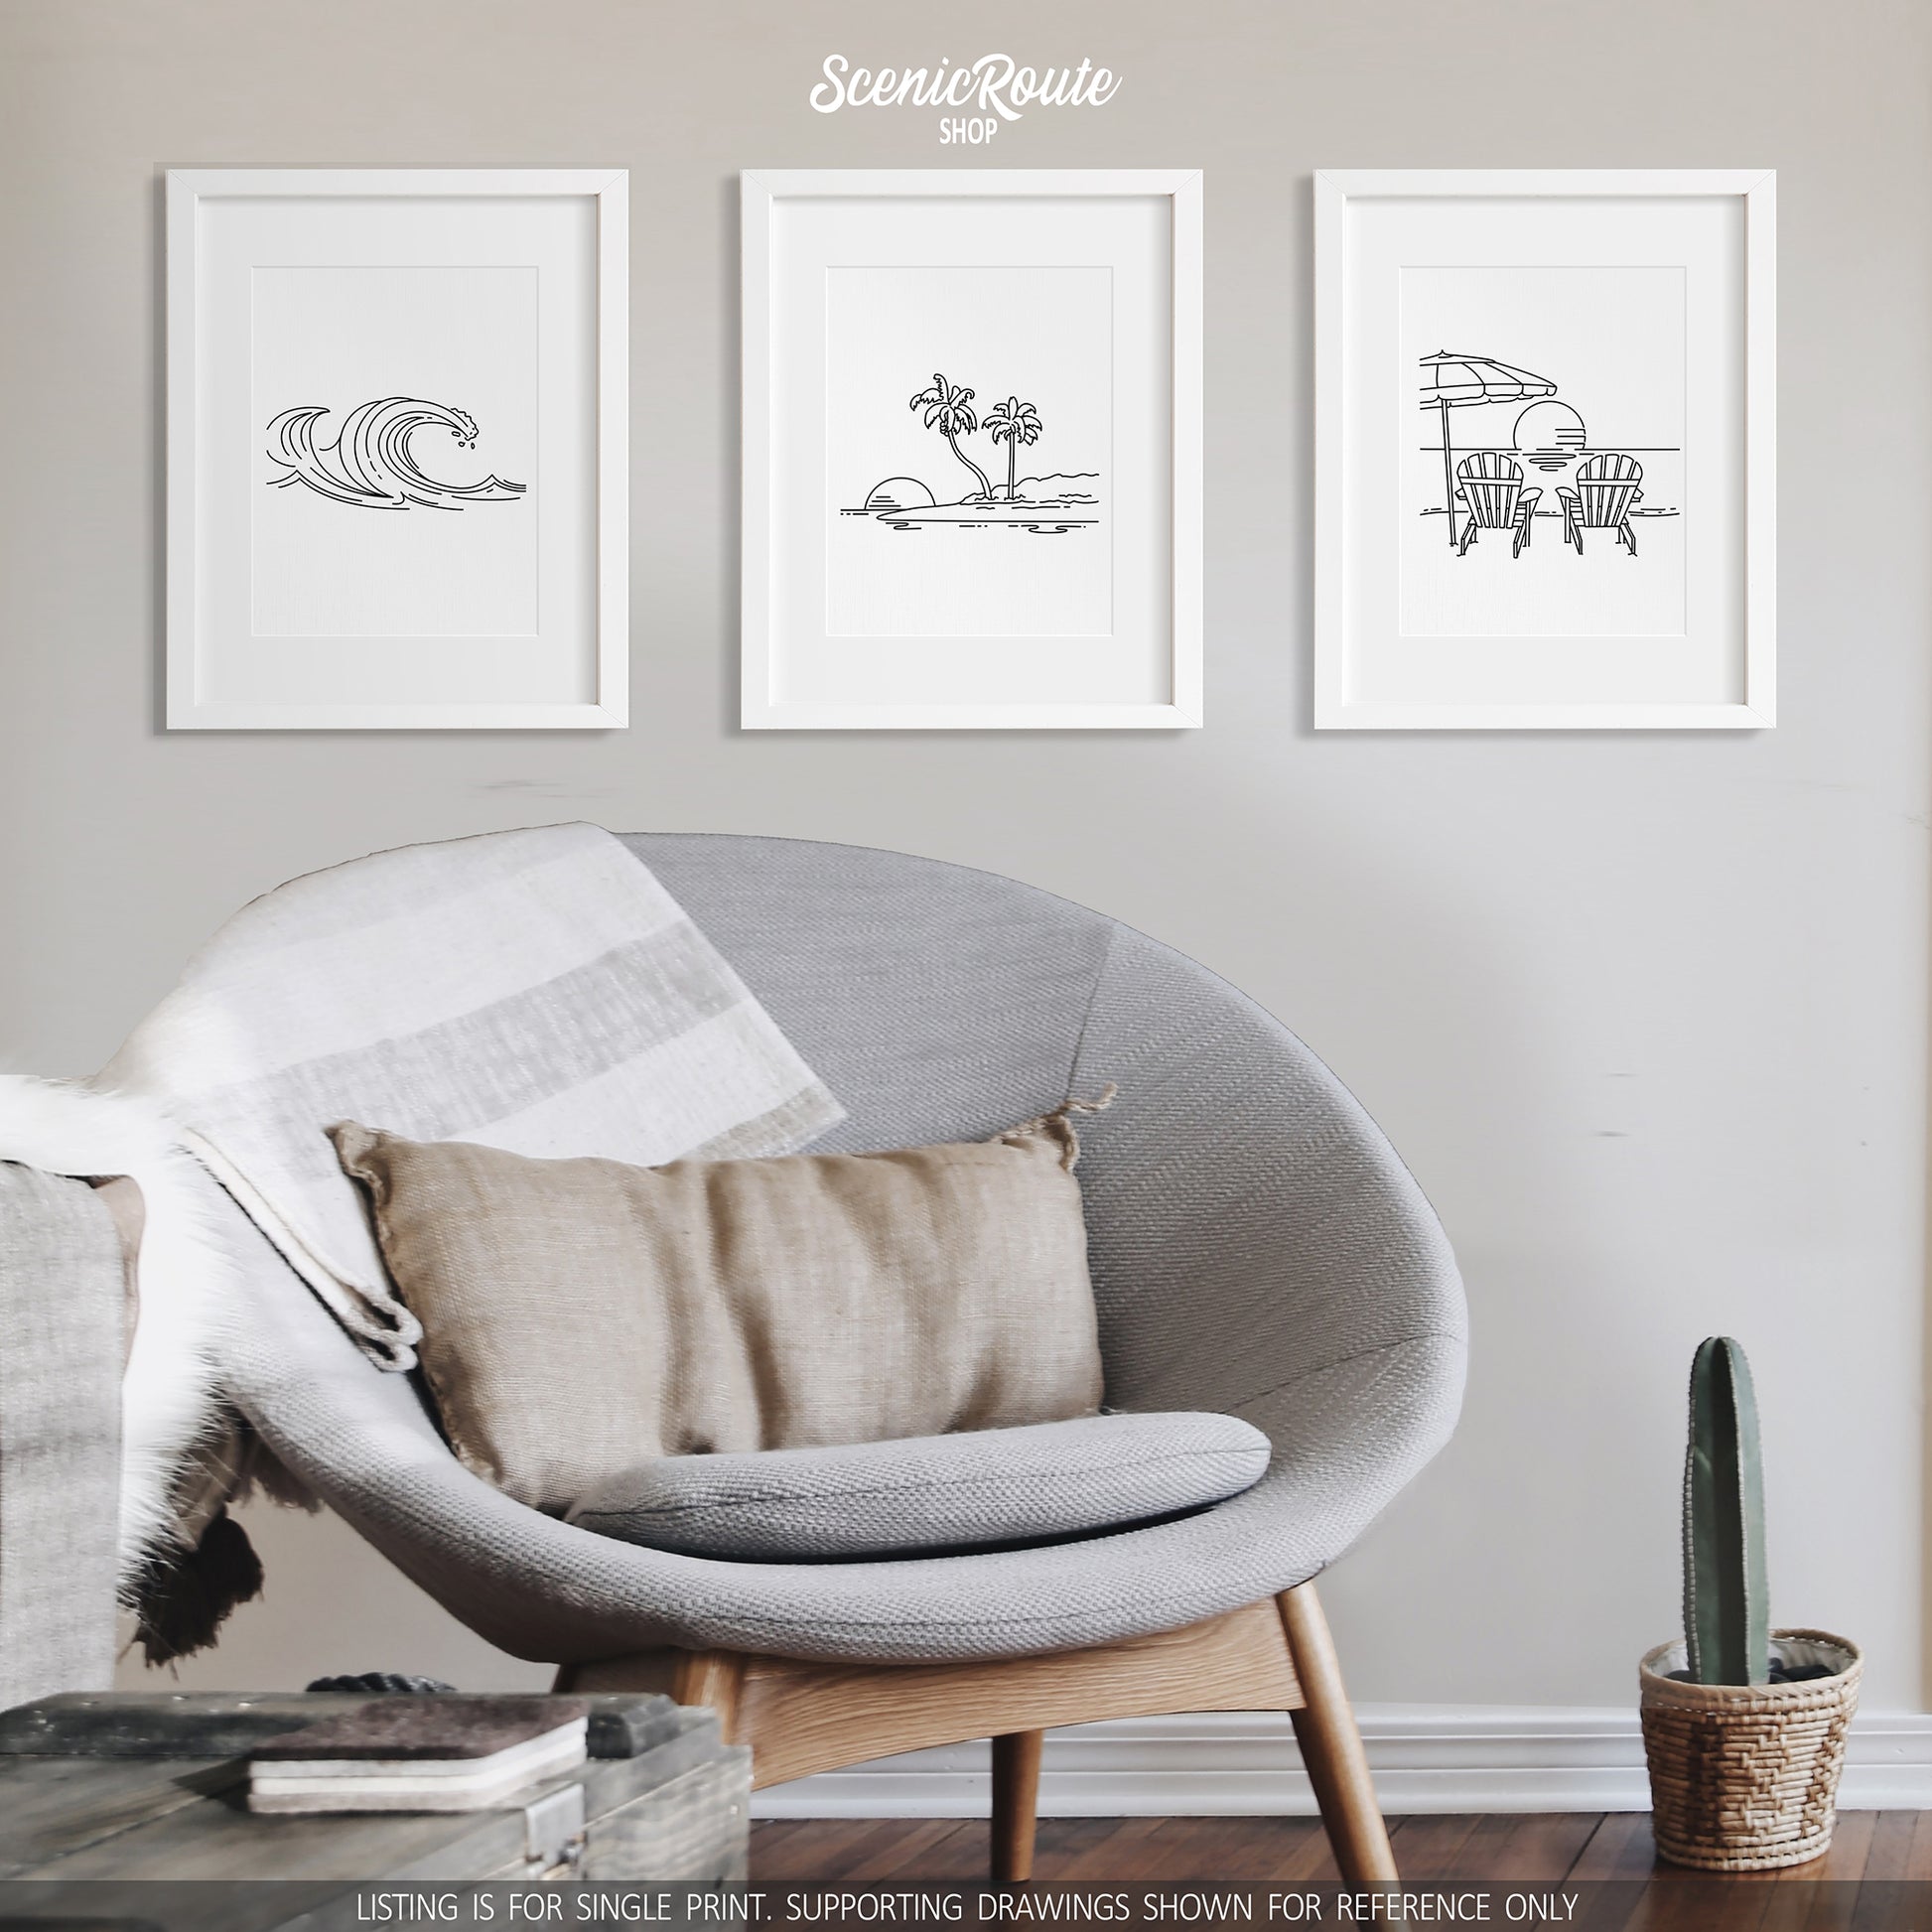 A group of three framed drawings on a white wall above a round chair. The line art drawings include Waves, an Island, and Adirondack Beach Chairs